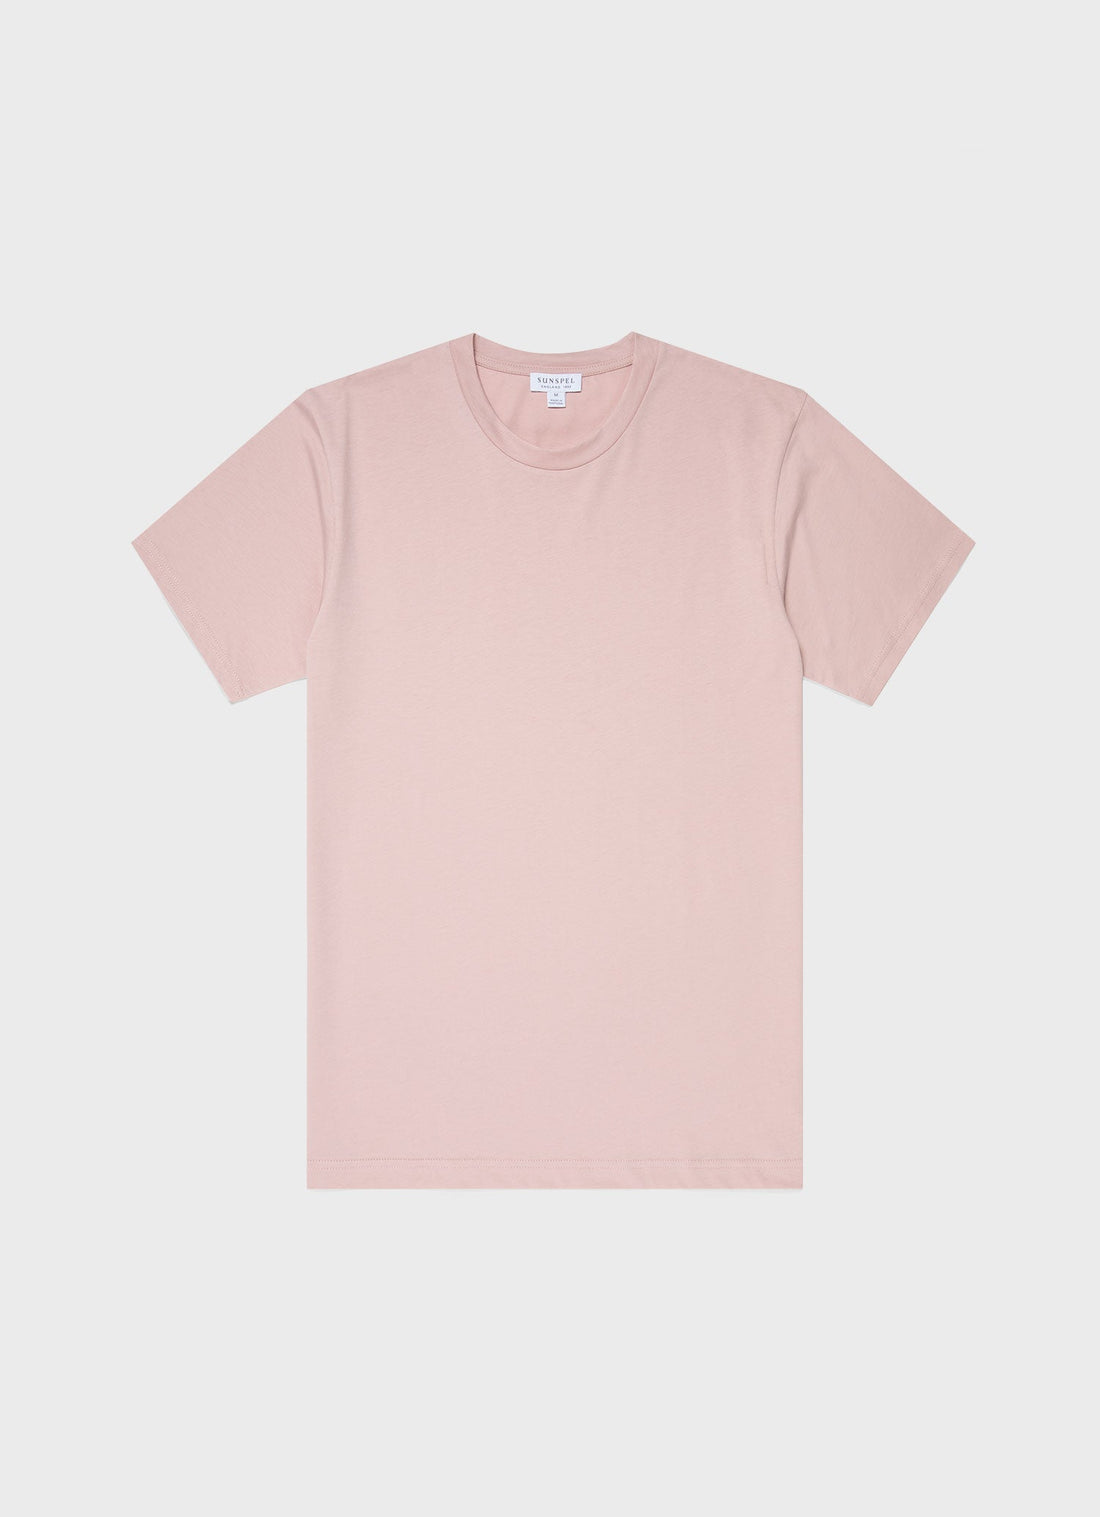 Men's Riviera T‑shirt in Shell Pink